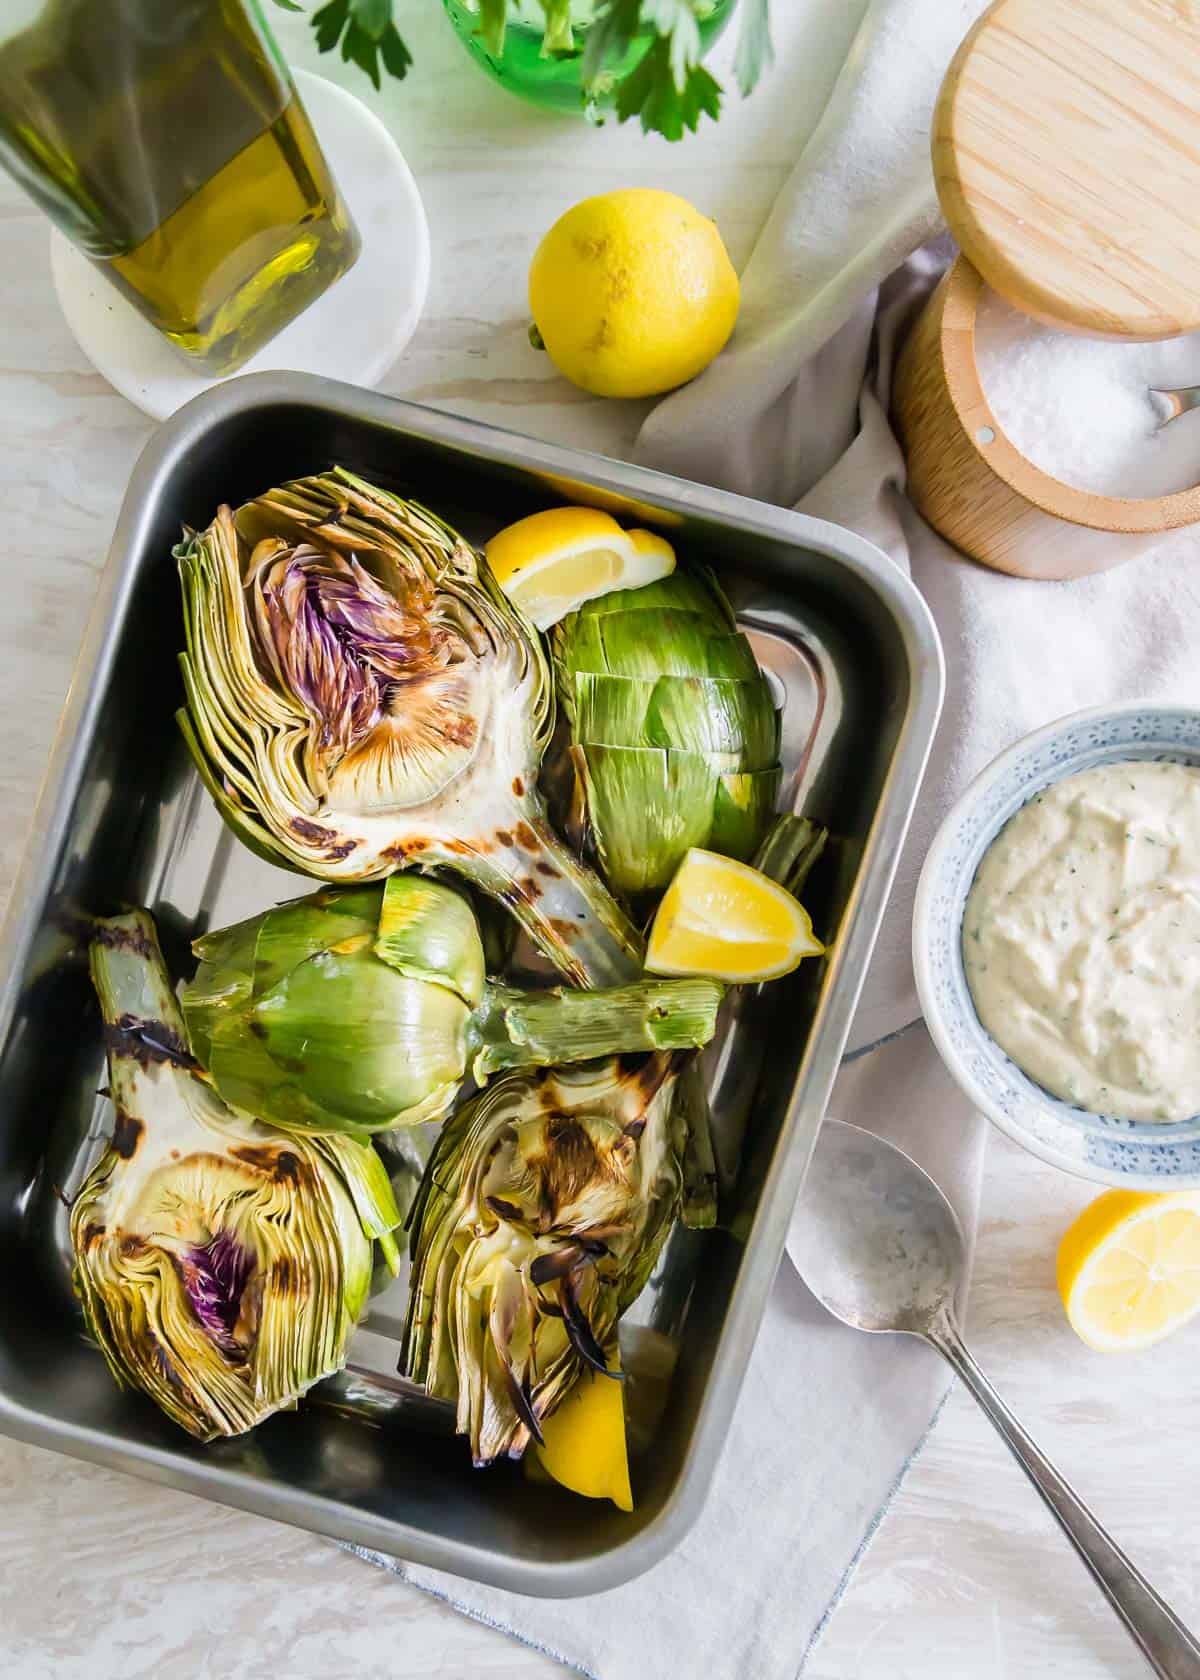 Simple grilled artichokes are a great new way to enjoy this lovely spring vegetable with a tasty tahini lemon dipping sauce.